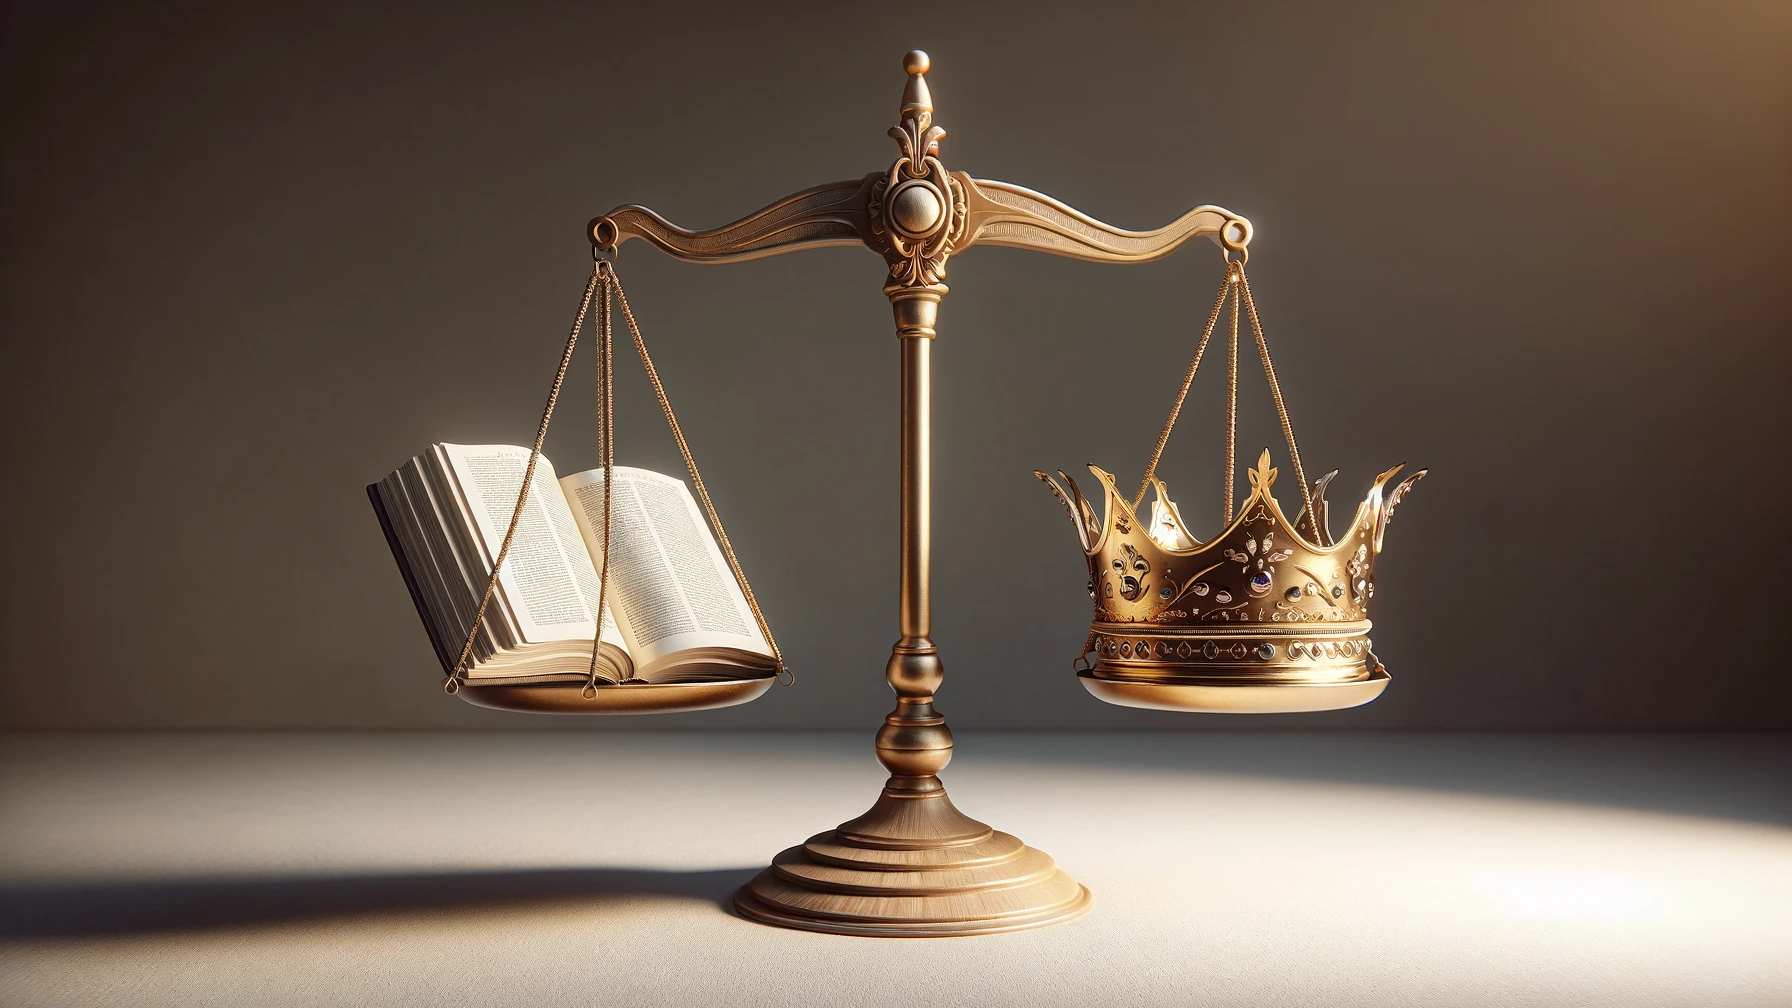 
a scale with an open book symbolizing intellectual humility on one side and a golden crown on the other representing arrogance
